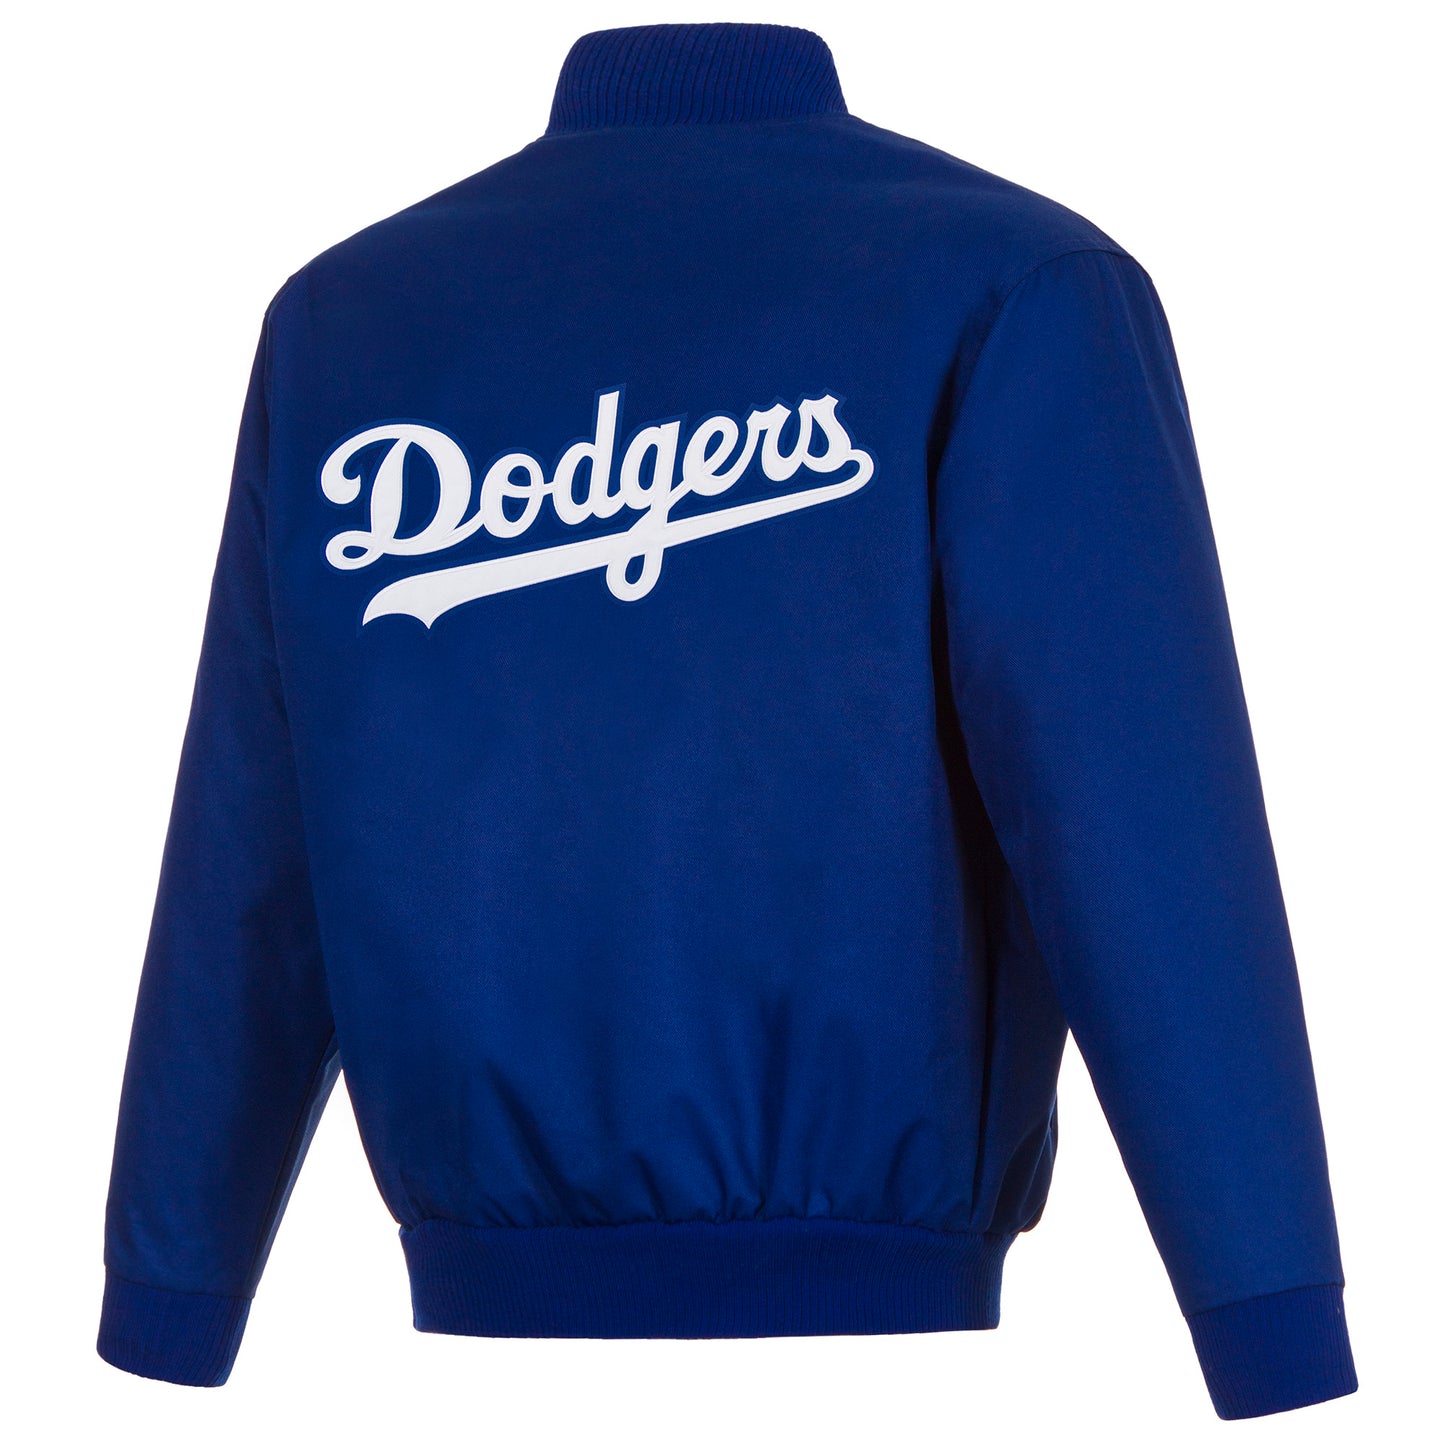 Los Angeles Dodgers Poly-Twill Jacket